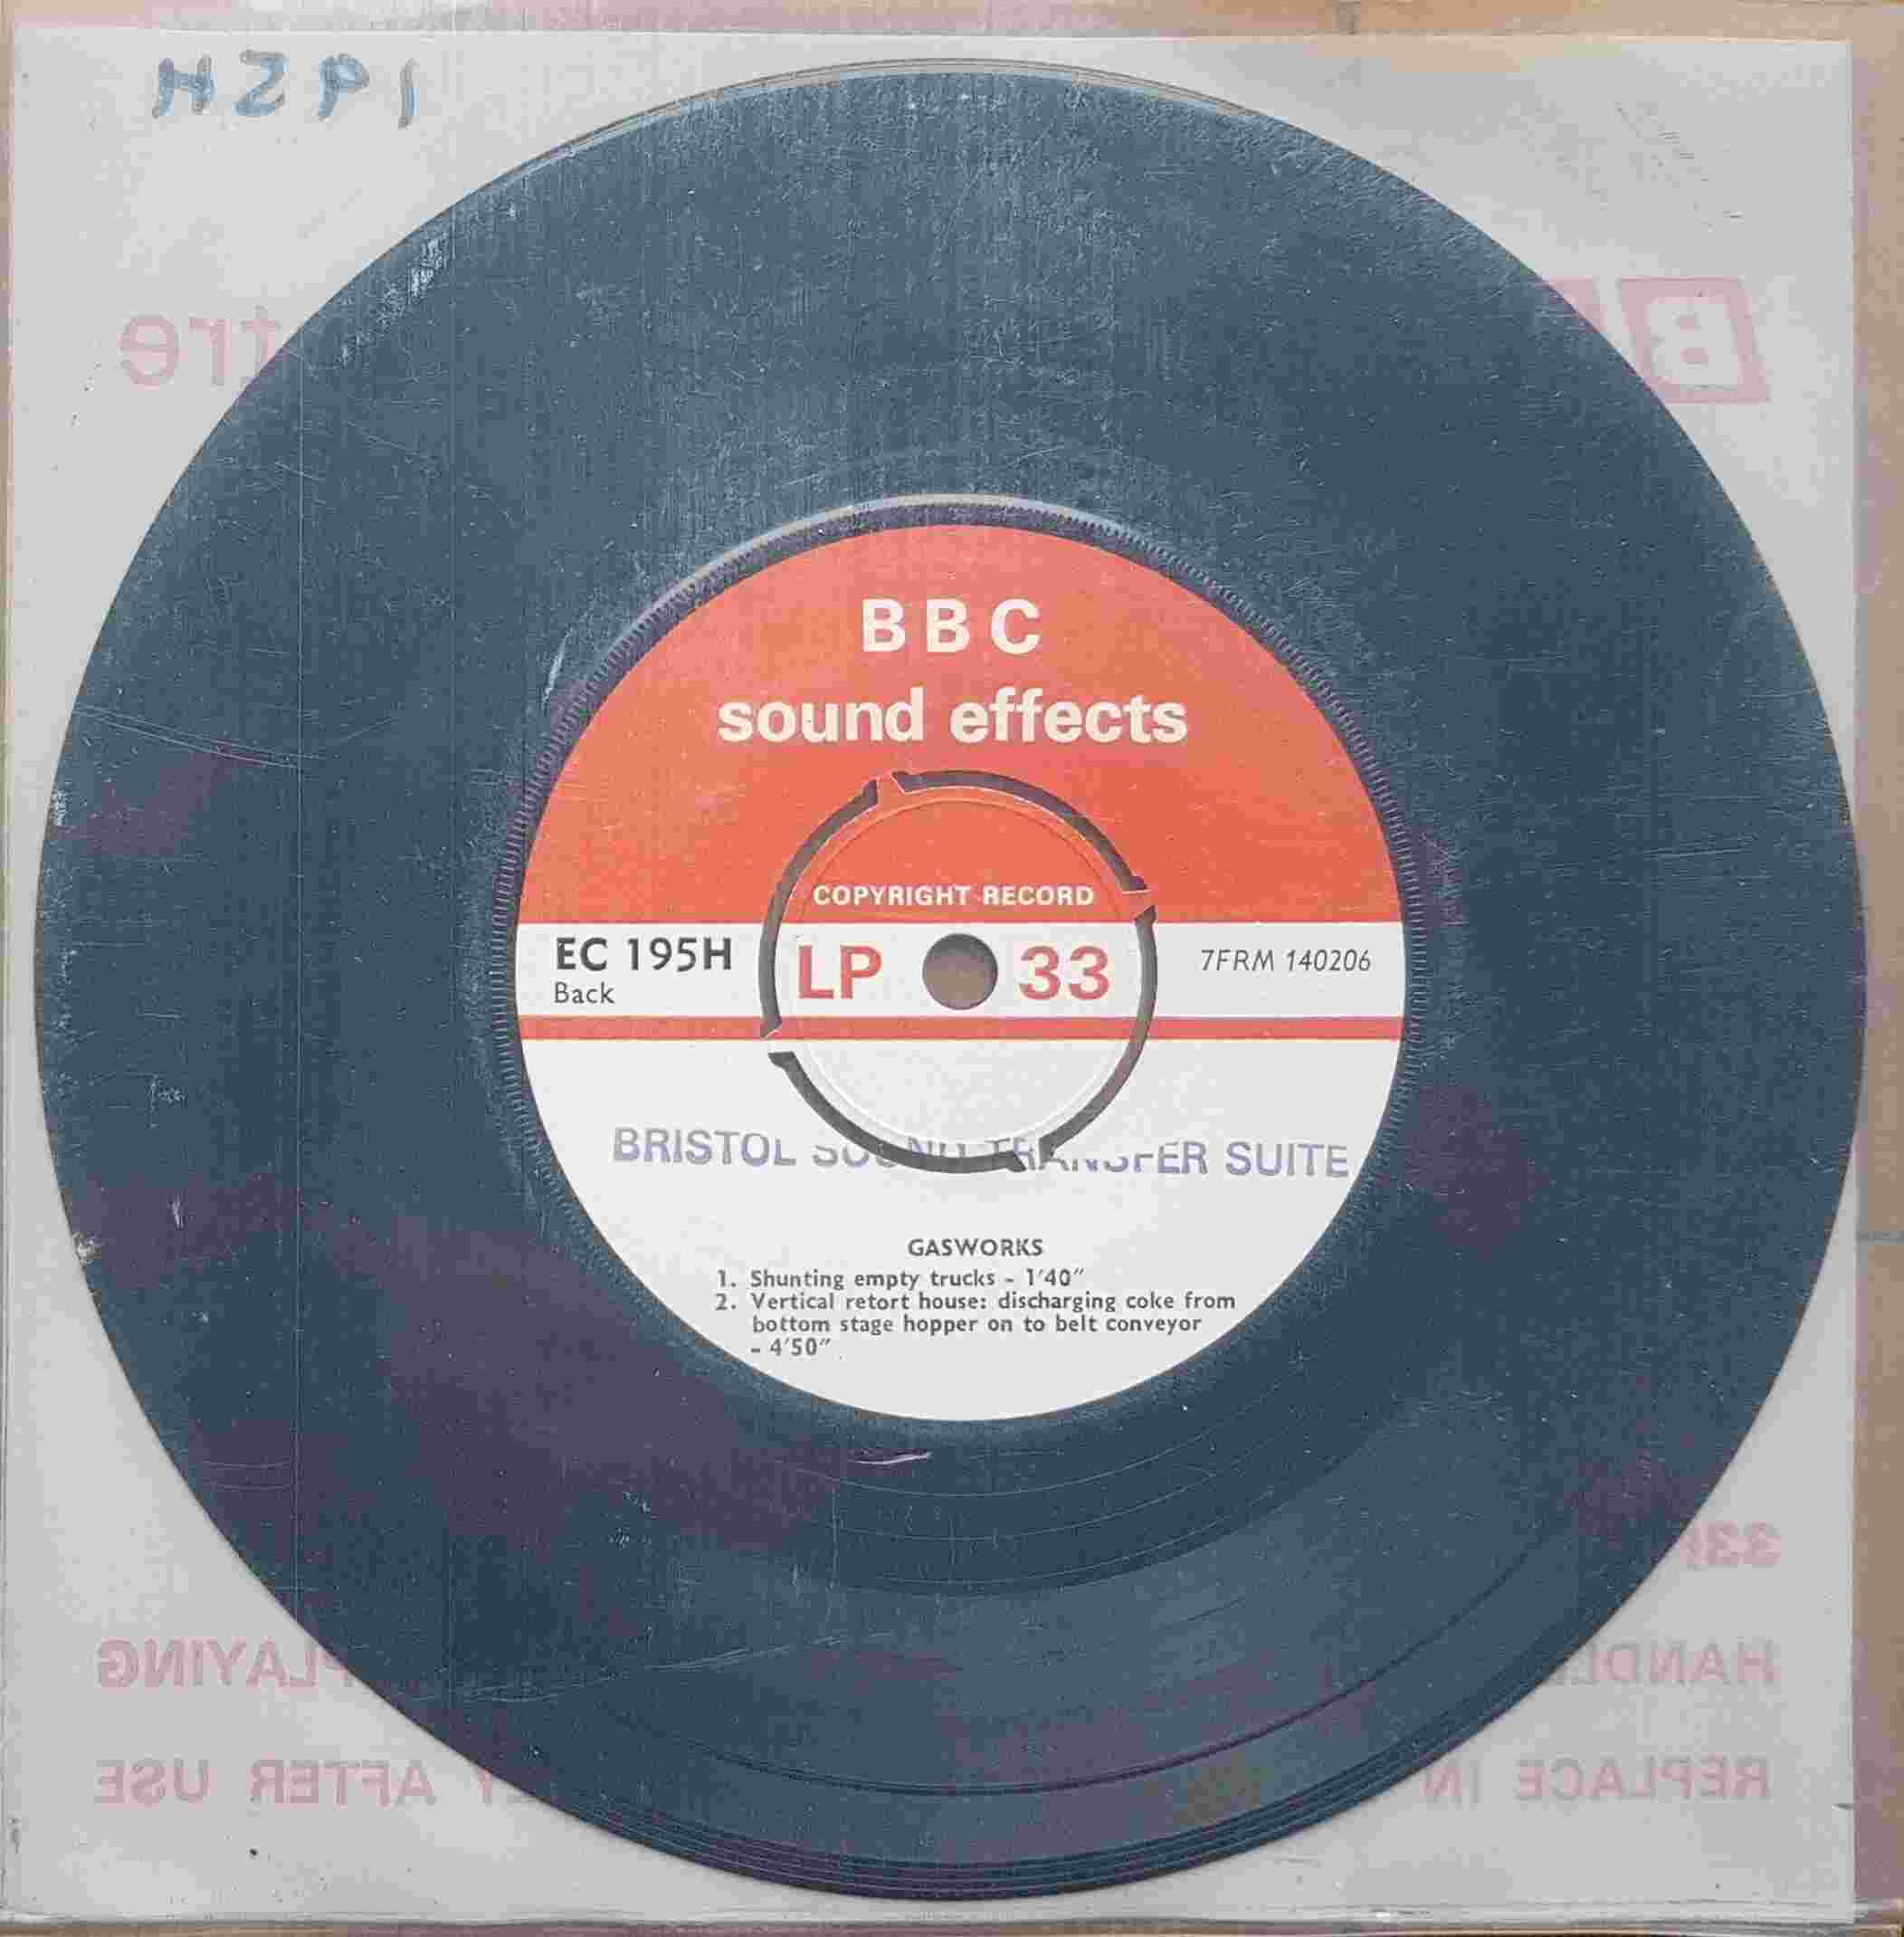 Picture of EC 195H Gasworks by artist Not registered from the BBC records and Tapes library